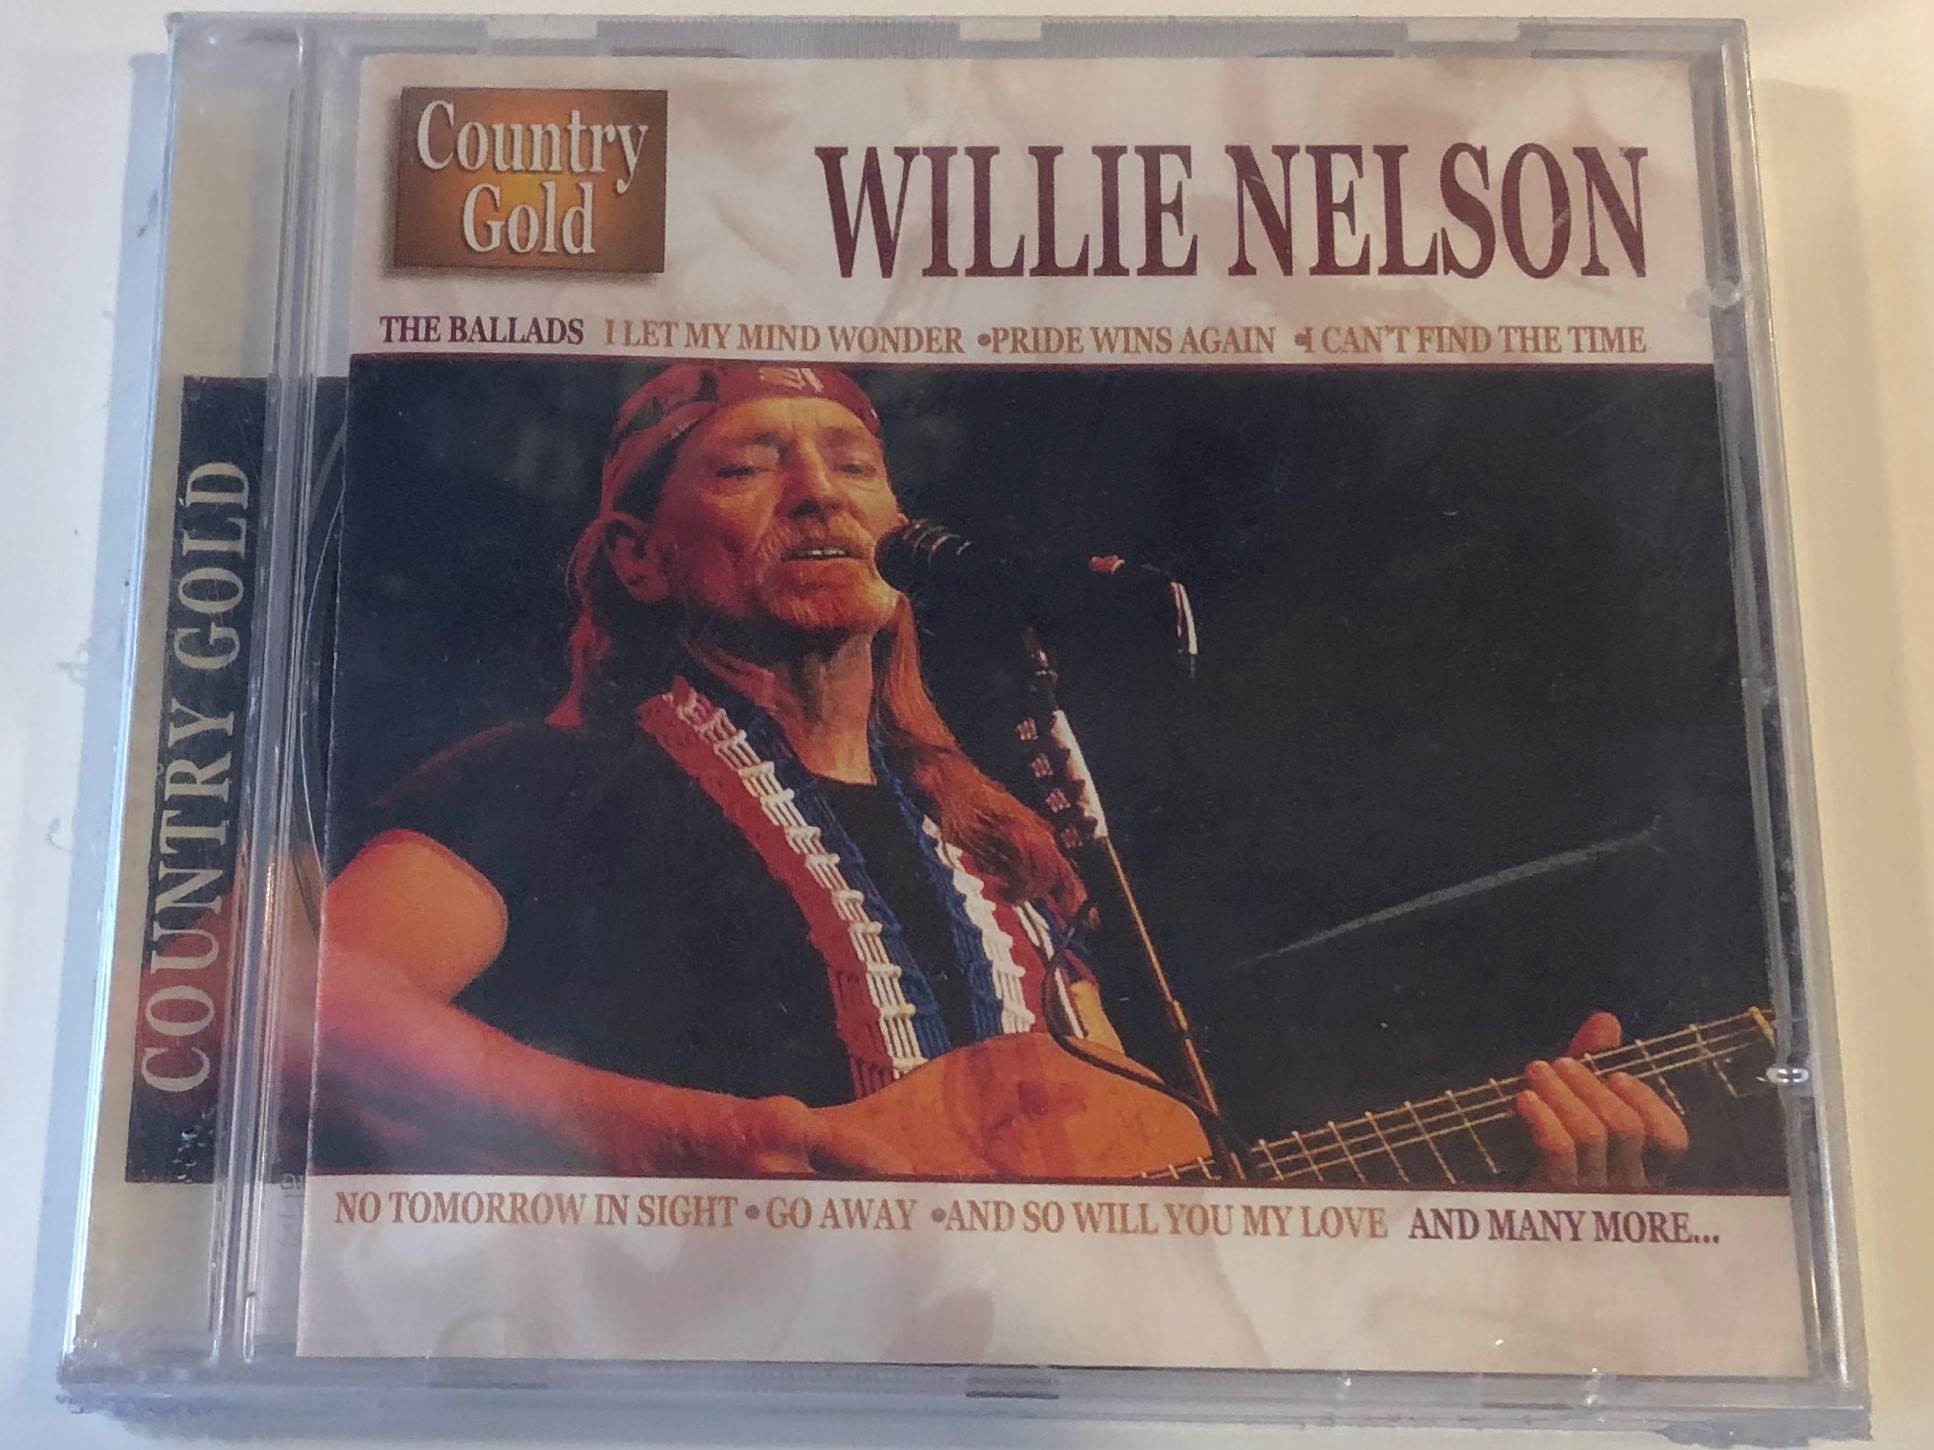 willie-neslom-country-gold-the-ballads-i-let-my-mind-wonder-pride-wins-again-i-can-t-find-the-time-no-tomorrow-in-sight-go-away-and-so-will-you-my-love-and-many-more...-galaxy-music-audi-1-.jpg